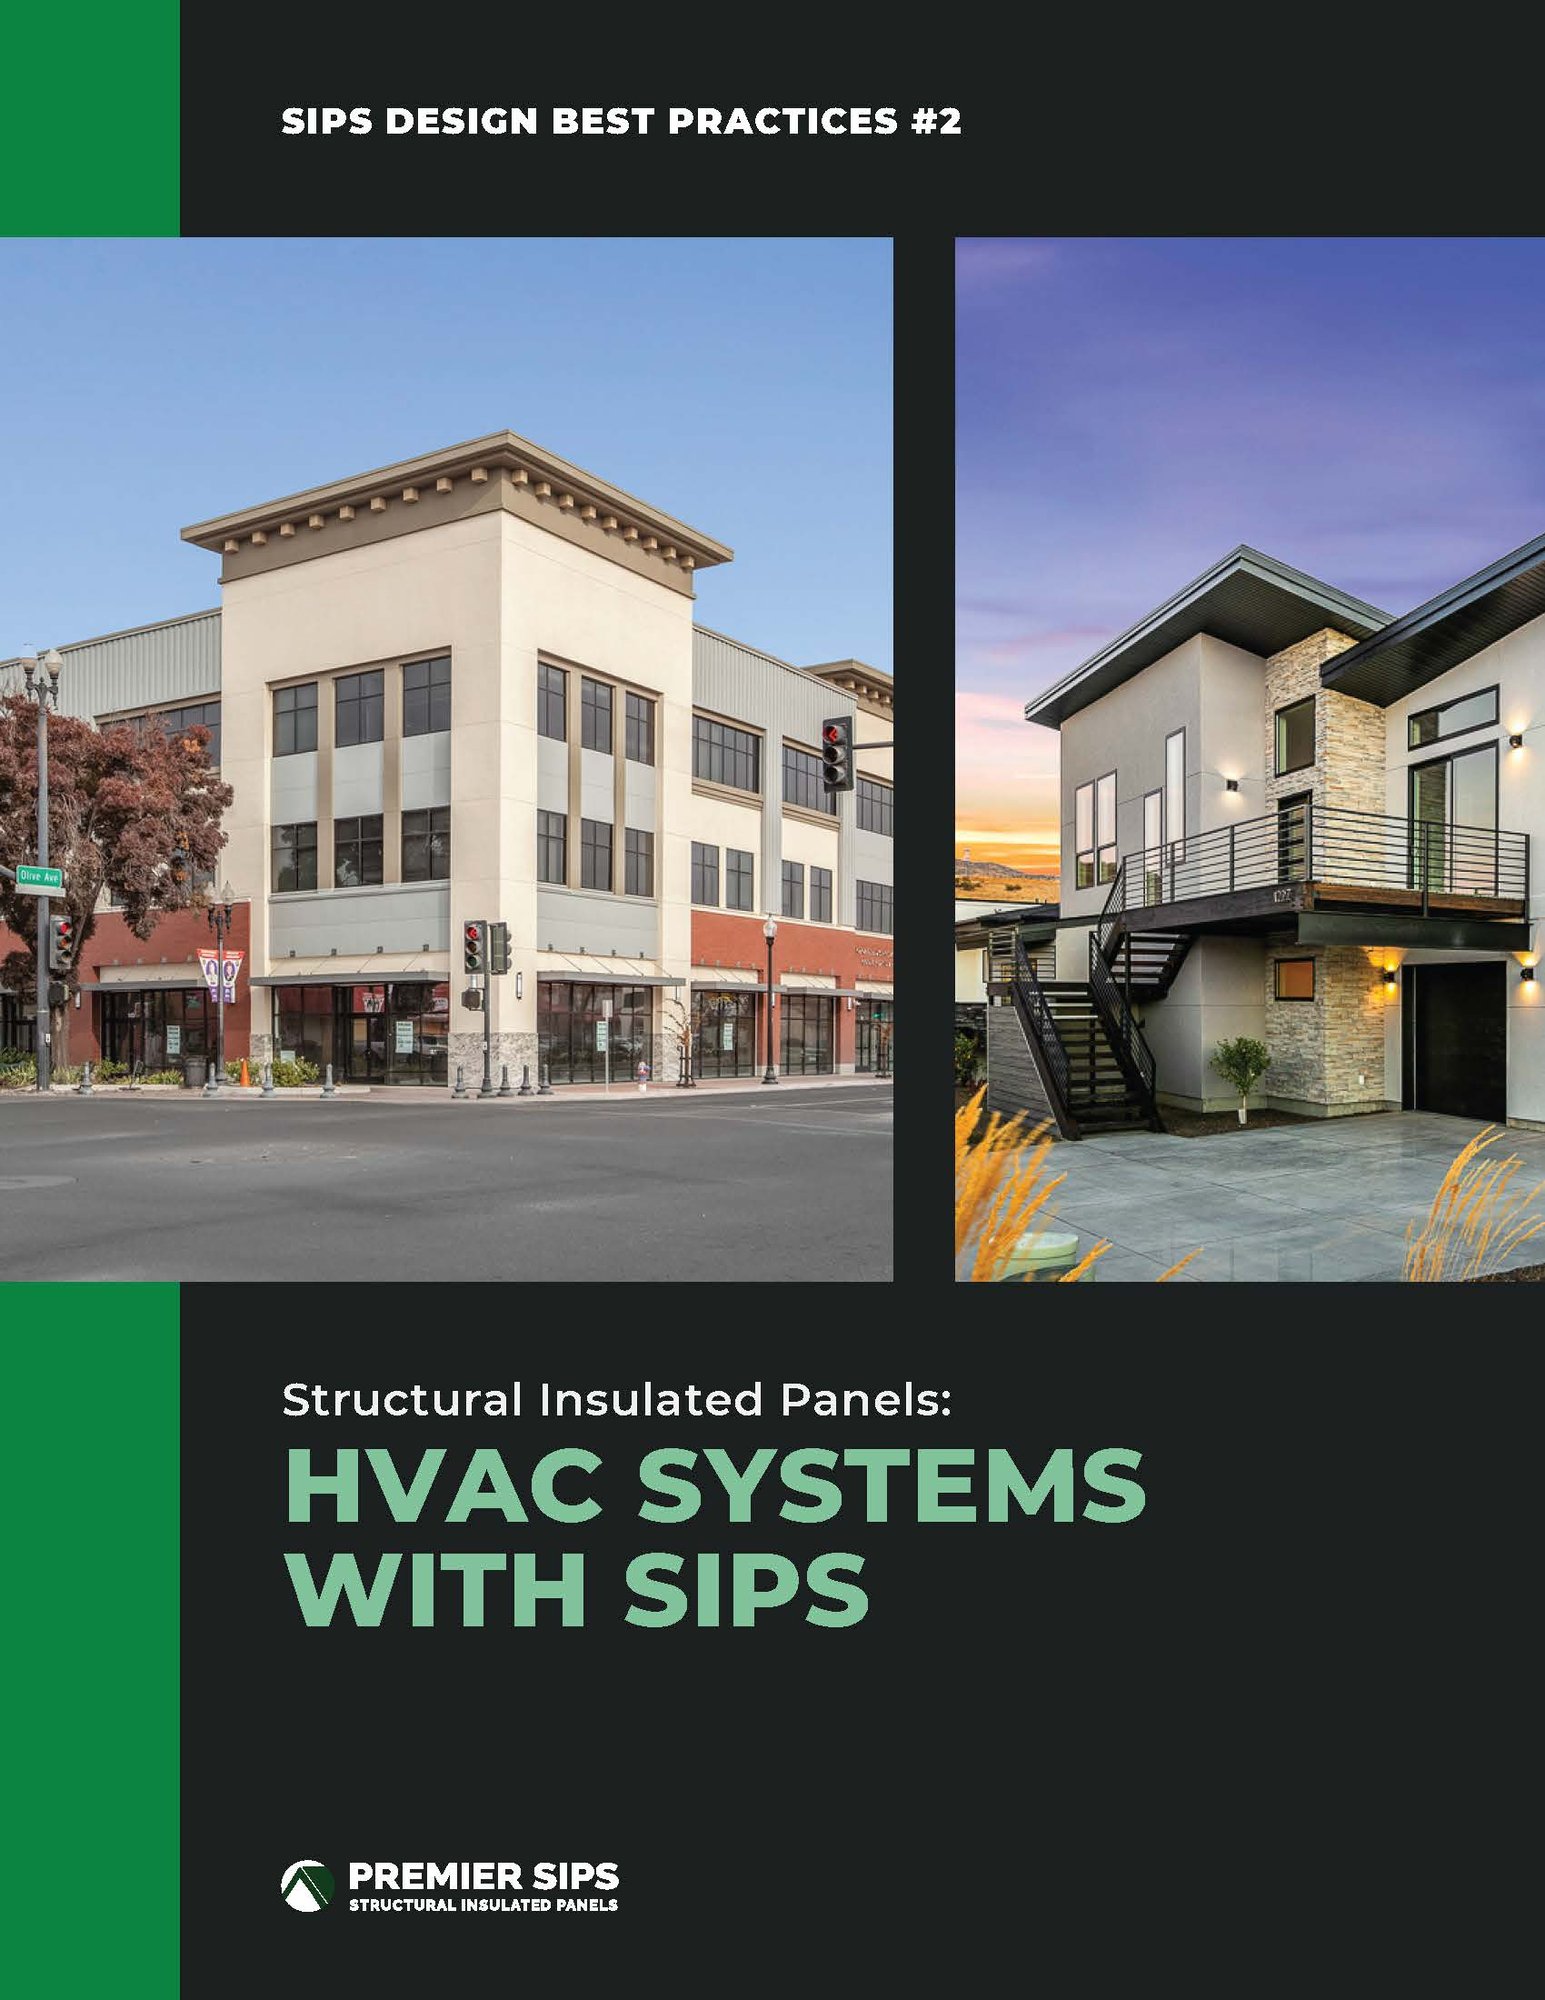 SIPS Design Best Practices #2: HVAC Systems with Structural Insulated Panels